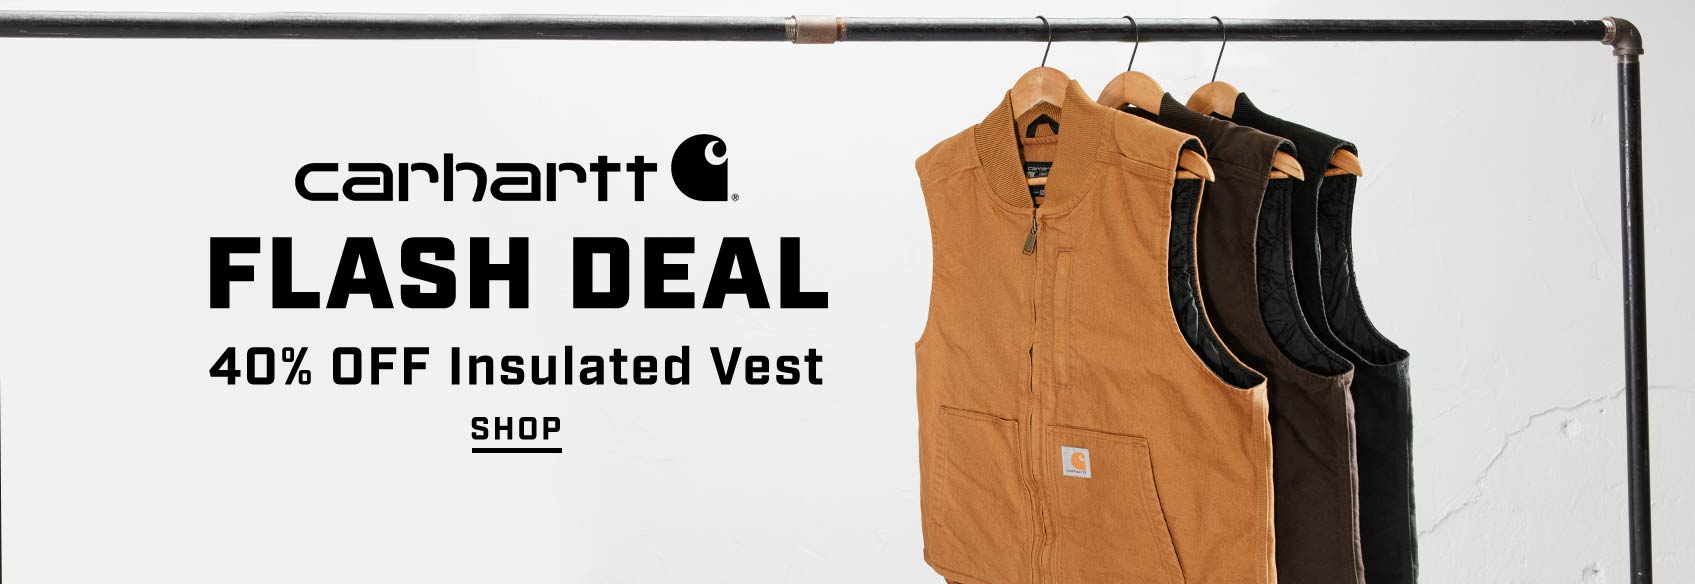 Three Carhartt bibs hanging on hangers against a white backdrop